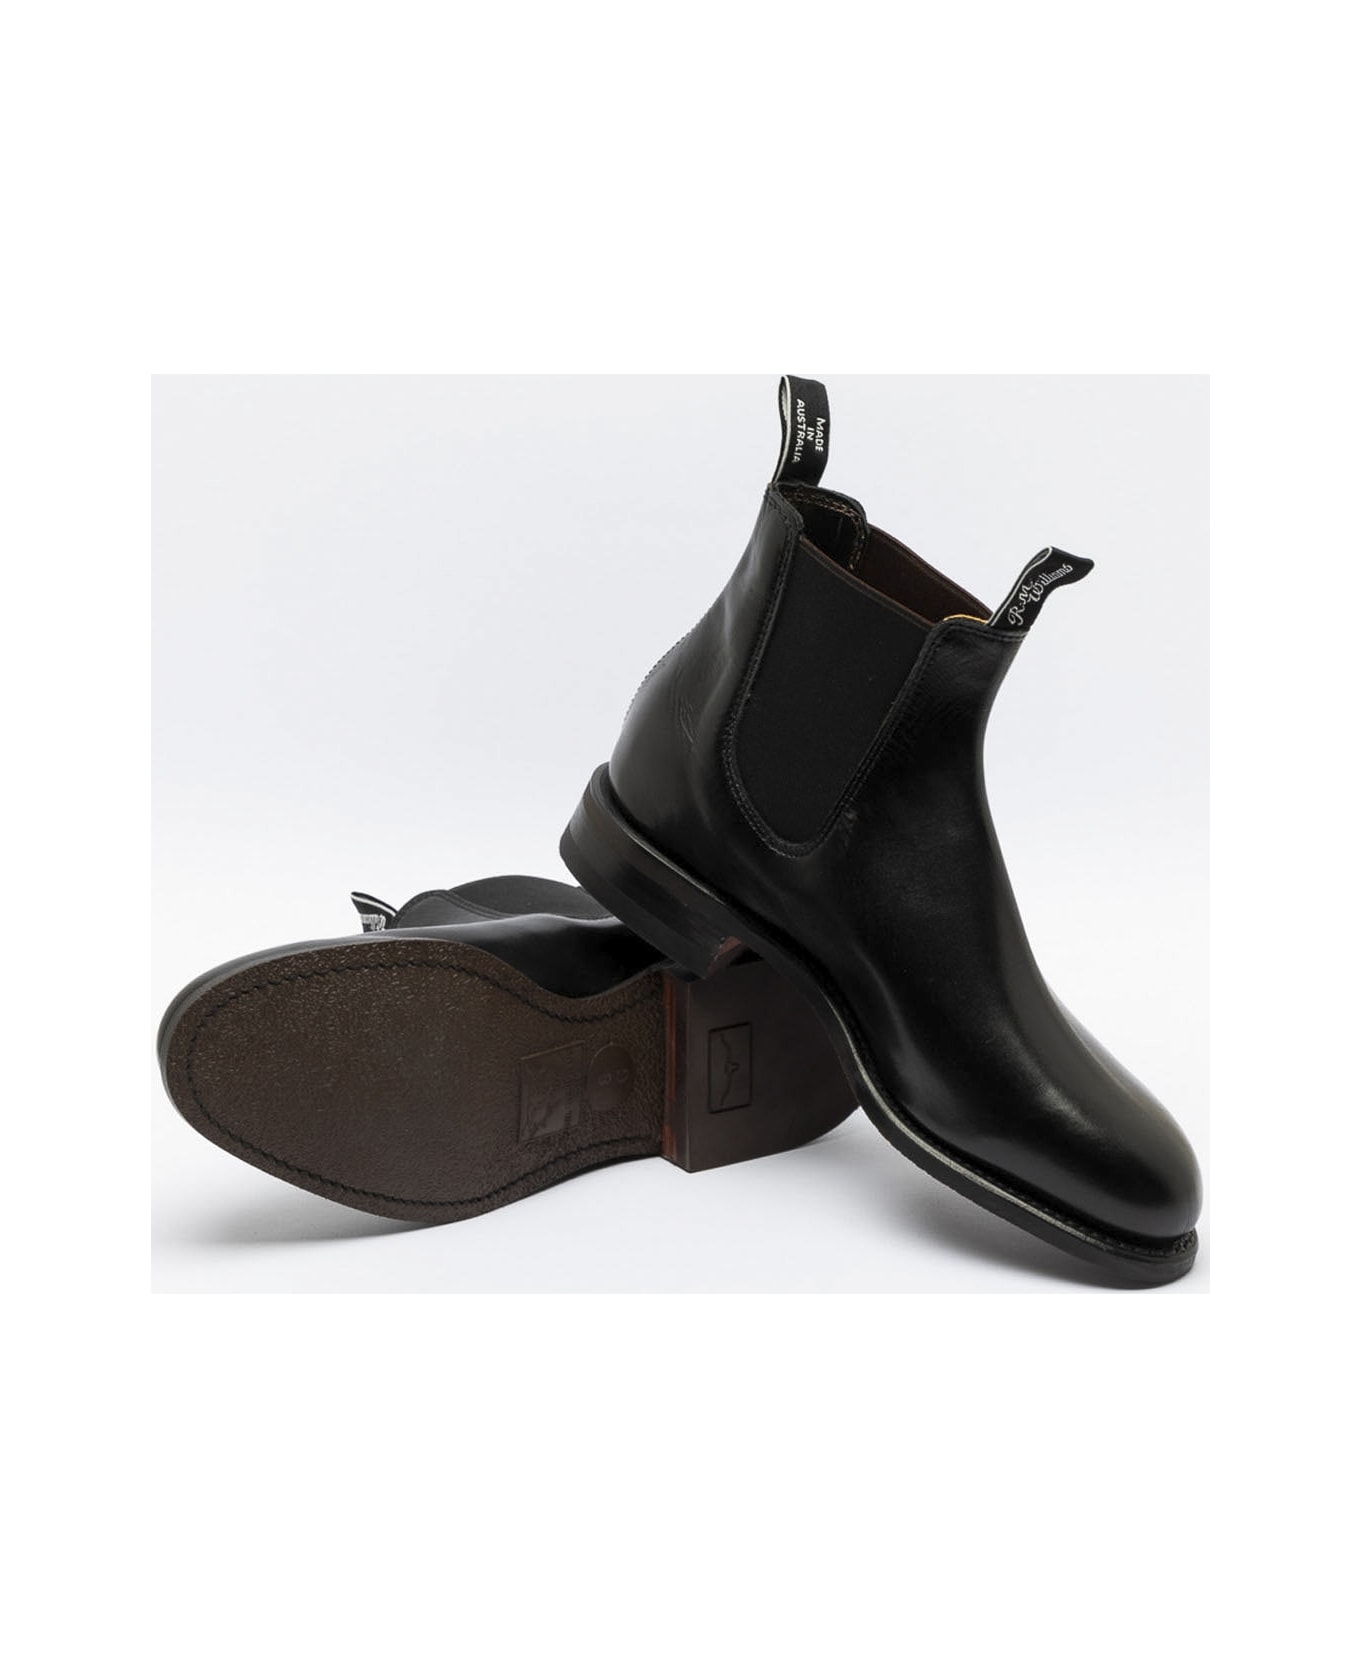 R.M.Williams Comfort Turnout Black Yearling Leather Chelsea Boot - Nero